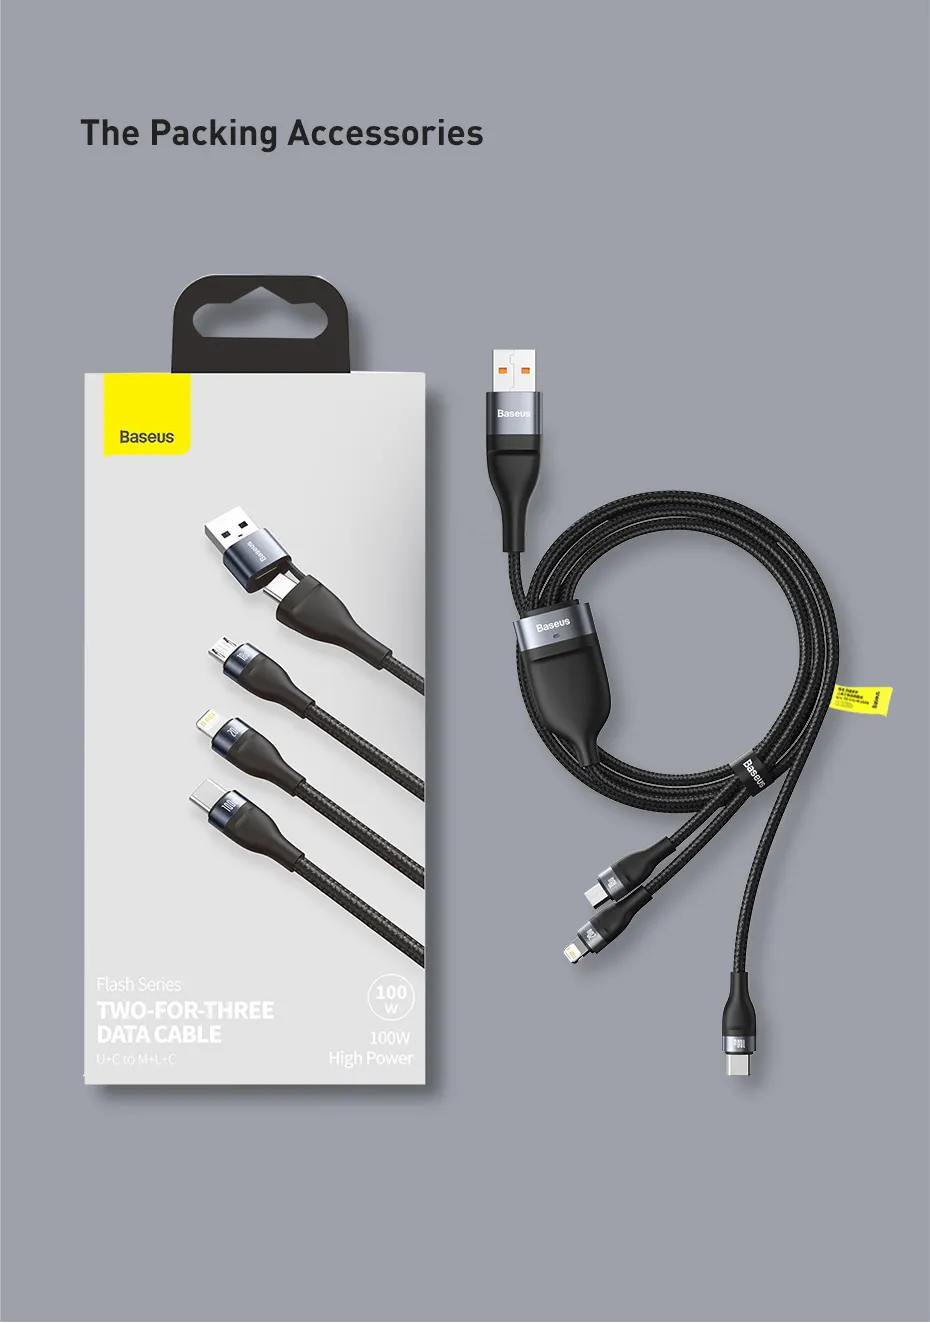 Baseus Flash Series Two for three Fast Charging Data Cable 100W 14